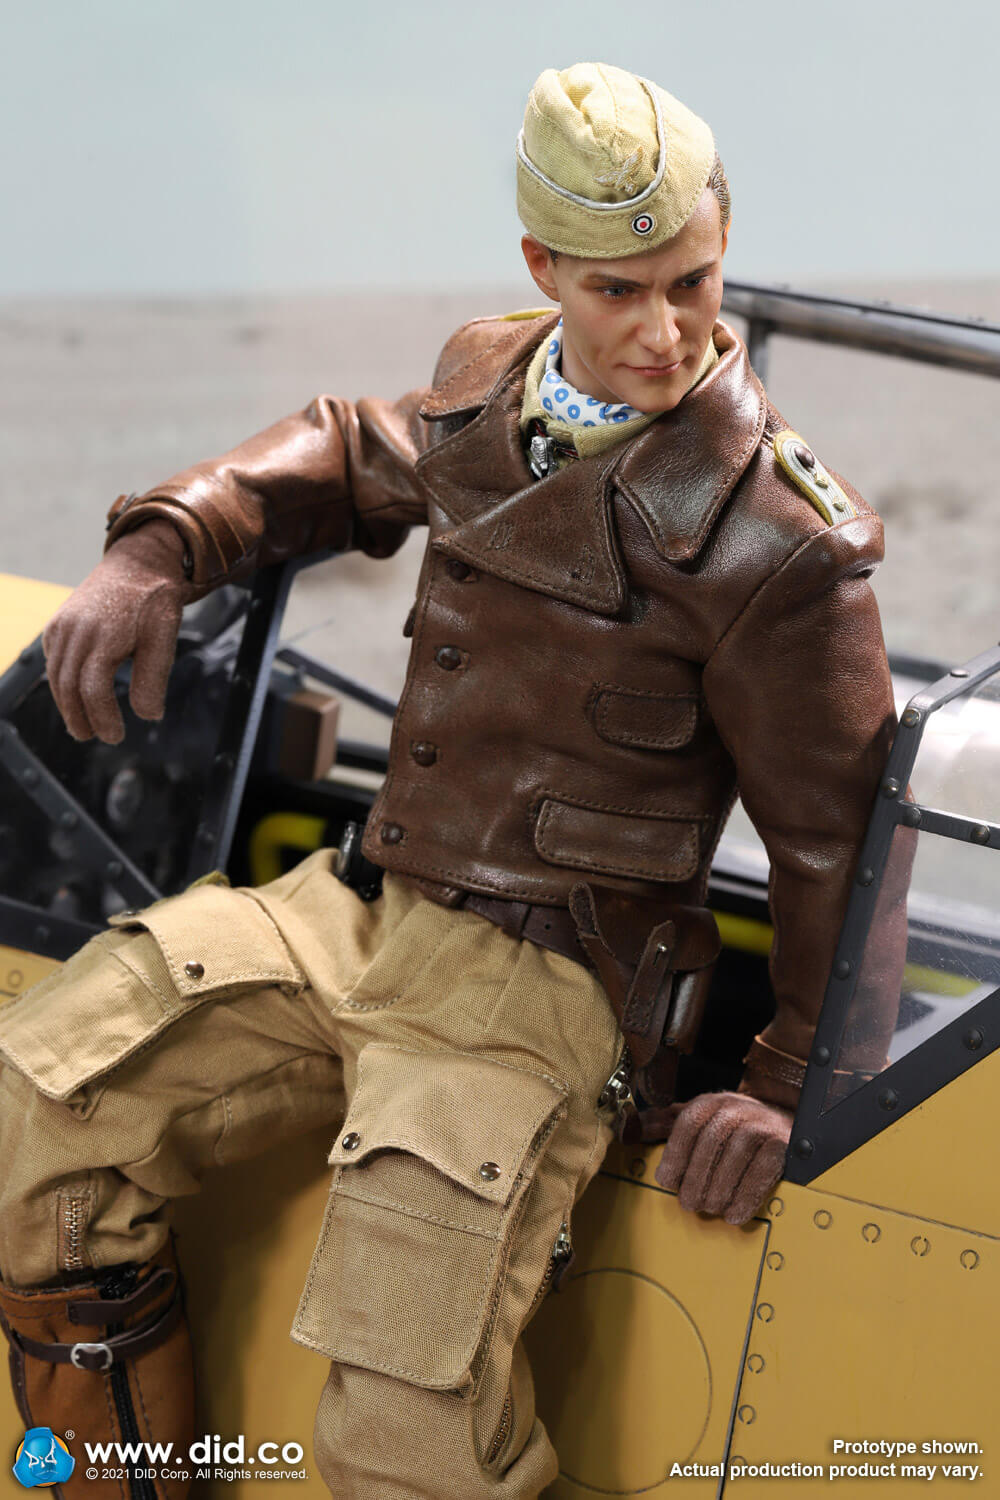 Historical - NEW PRODUCT: D80154 WWII German Luftwaffe Flying Ace “Star Of Africa” – Hans-Joachim Marseille & E60060  Diorama Of “Star Of Africa” 7468